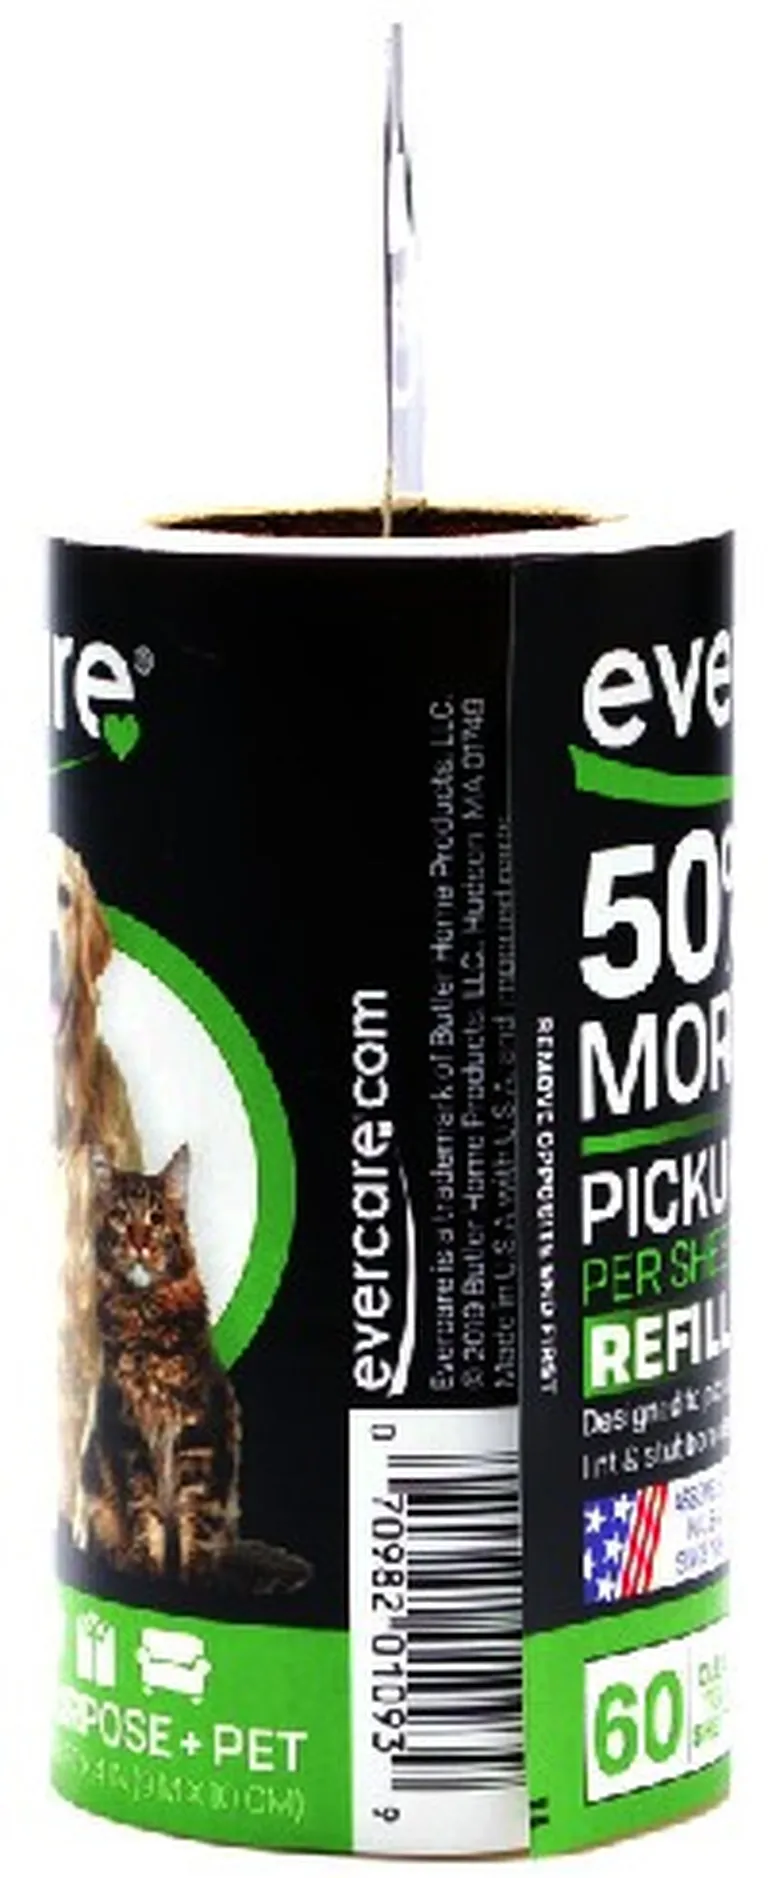 Evercare Lint Roller Extreme Stick Refill Photo 2